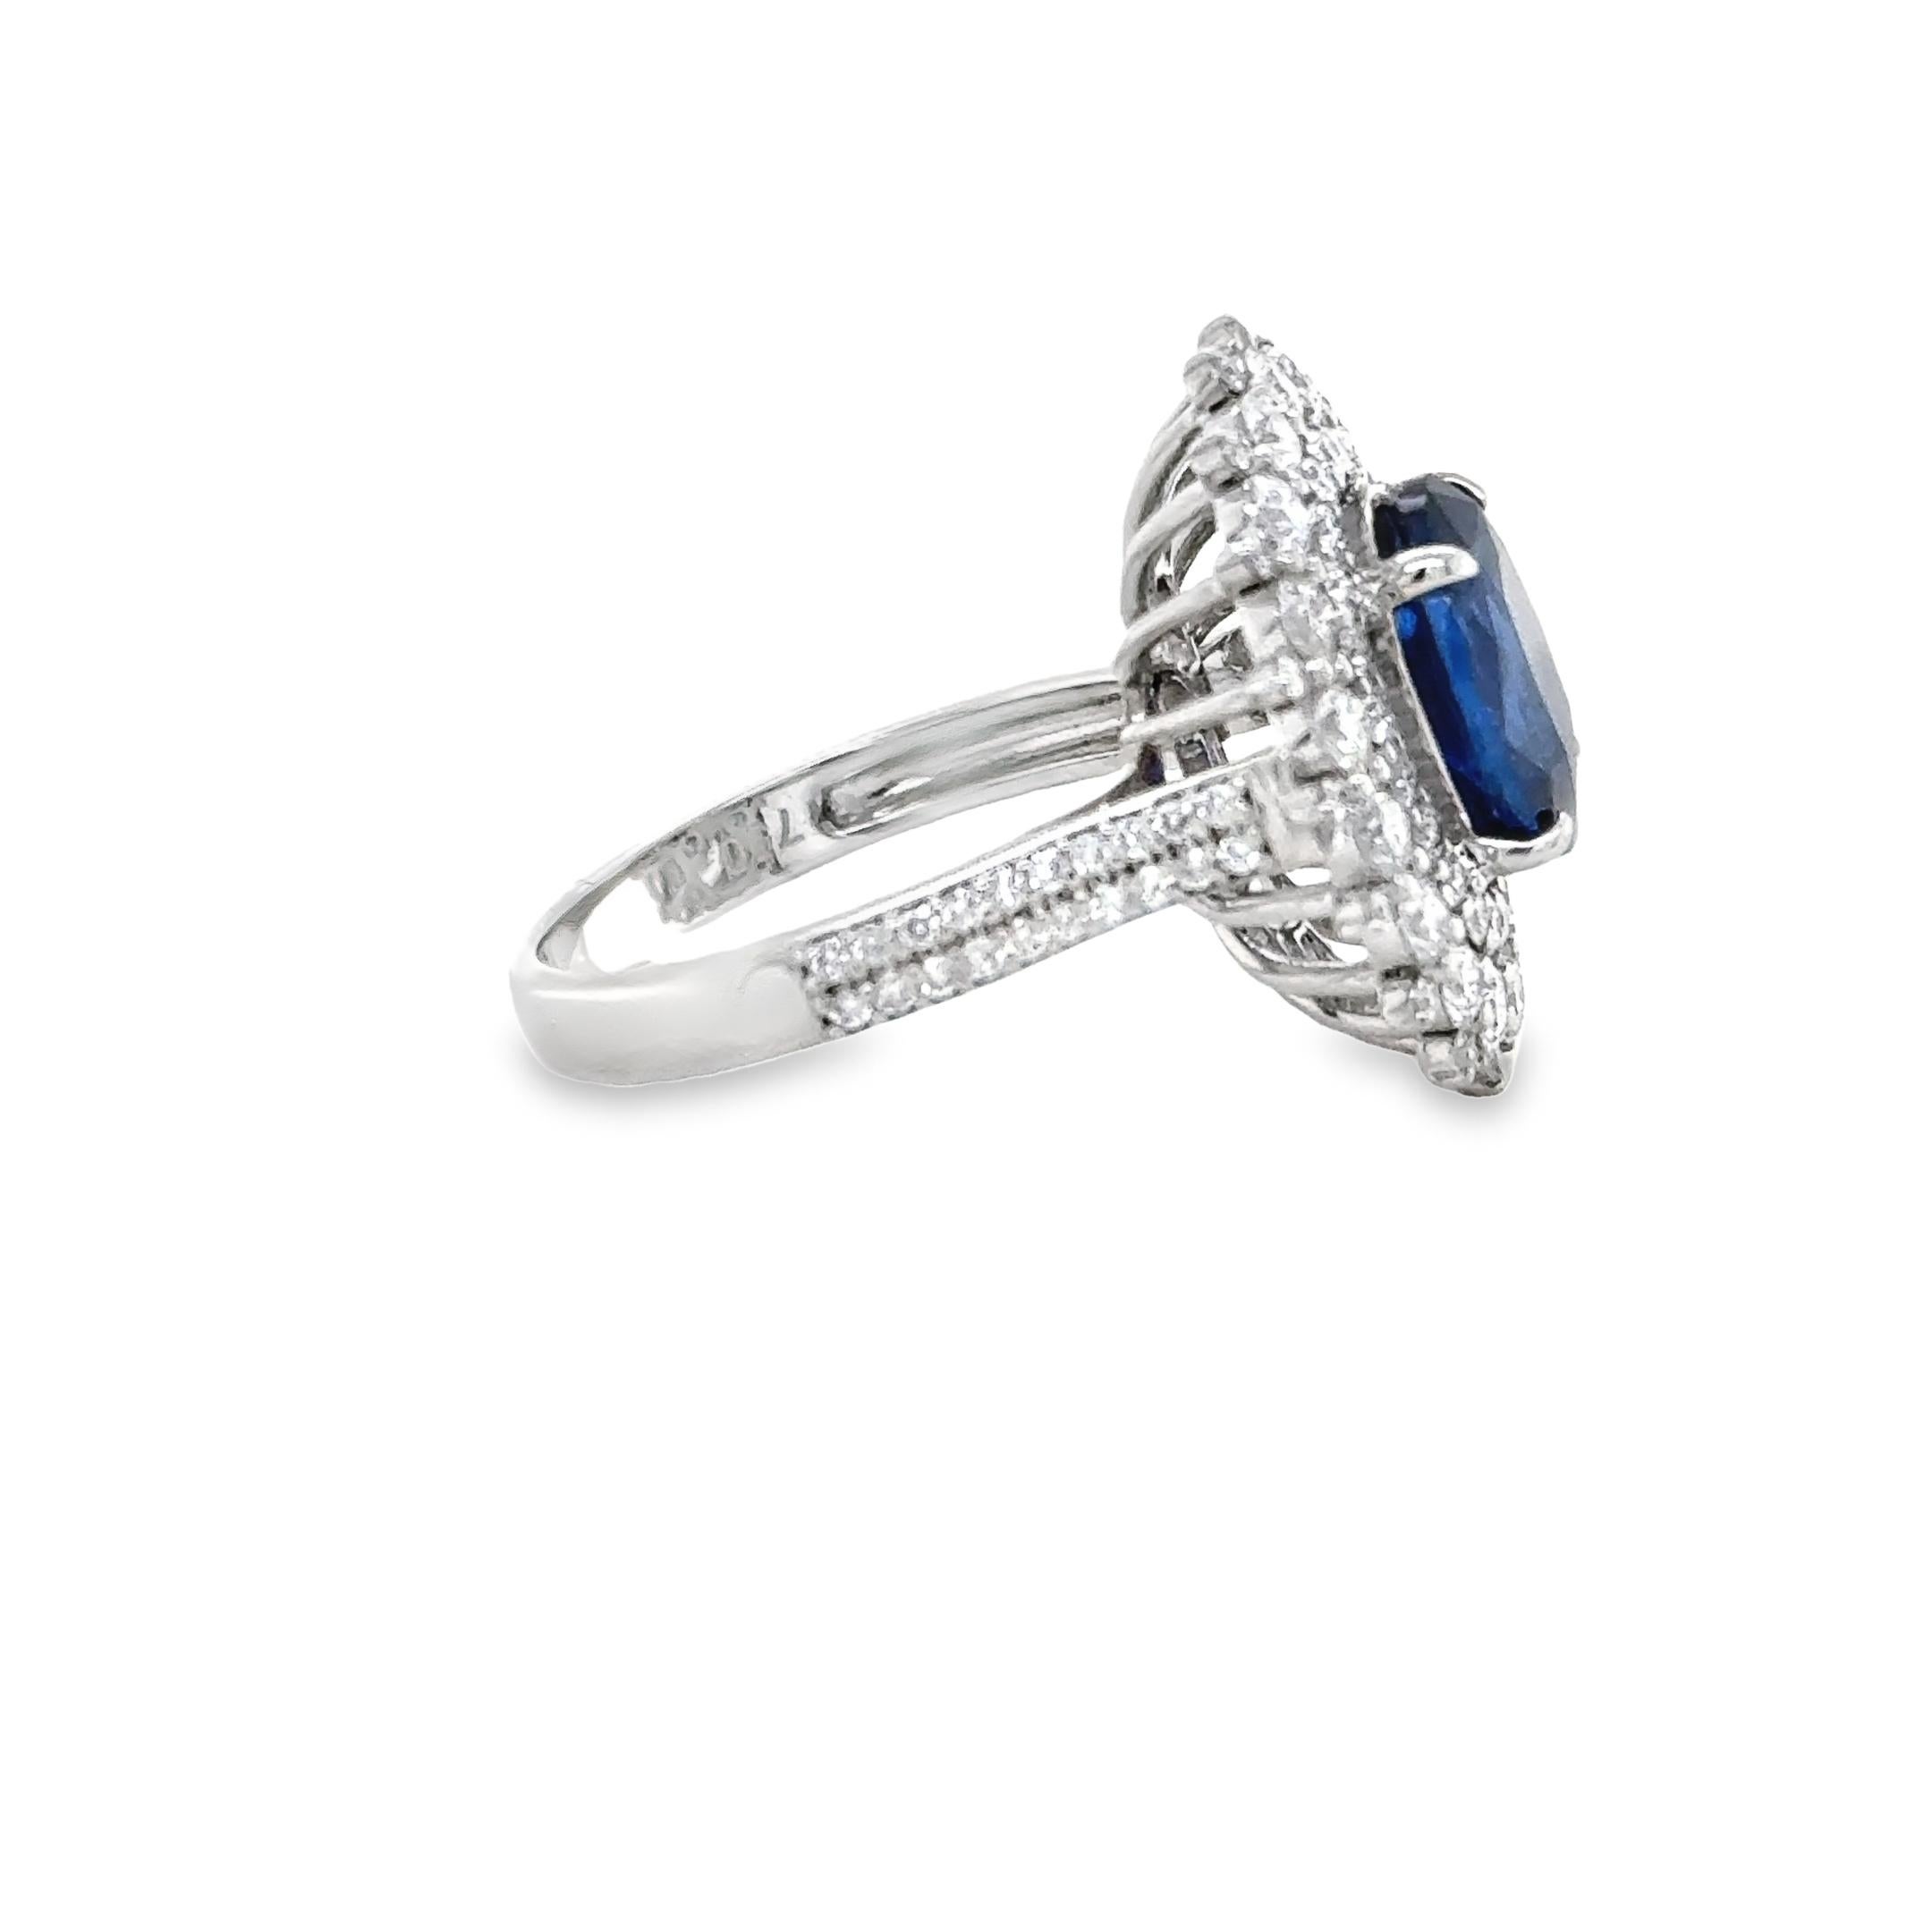 Oval Cut 3.95 Carat Royal Blue Oval Sapphire & Diamond Cluster Ring For Sale